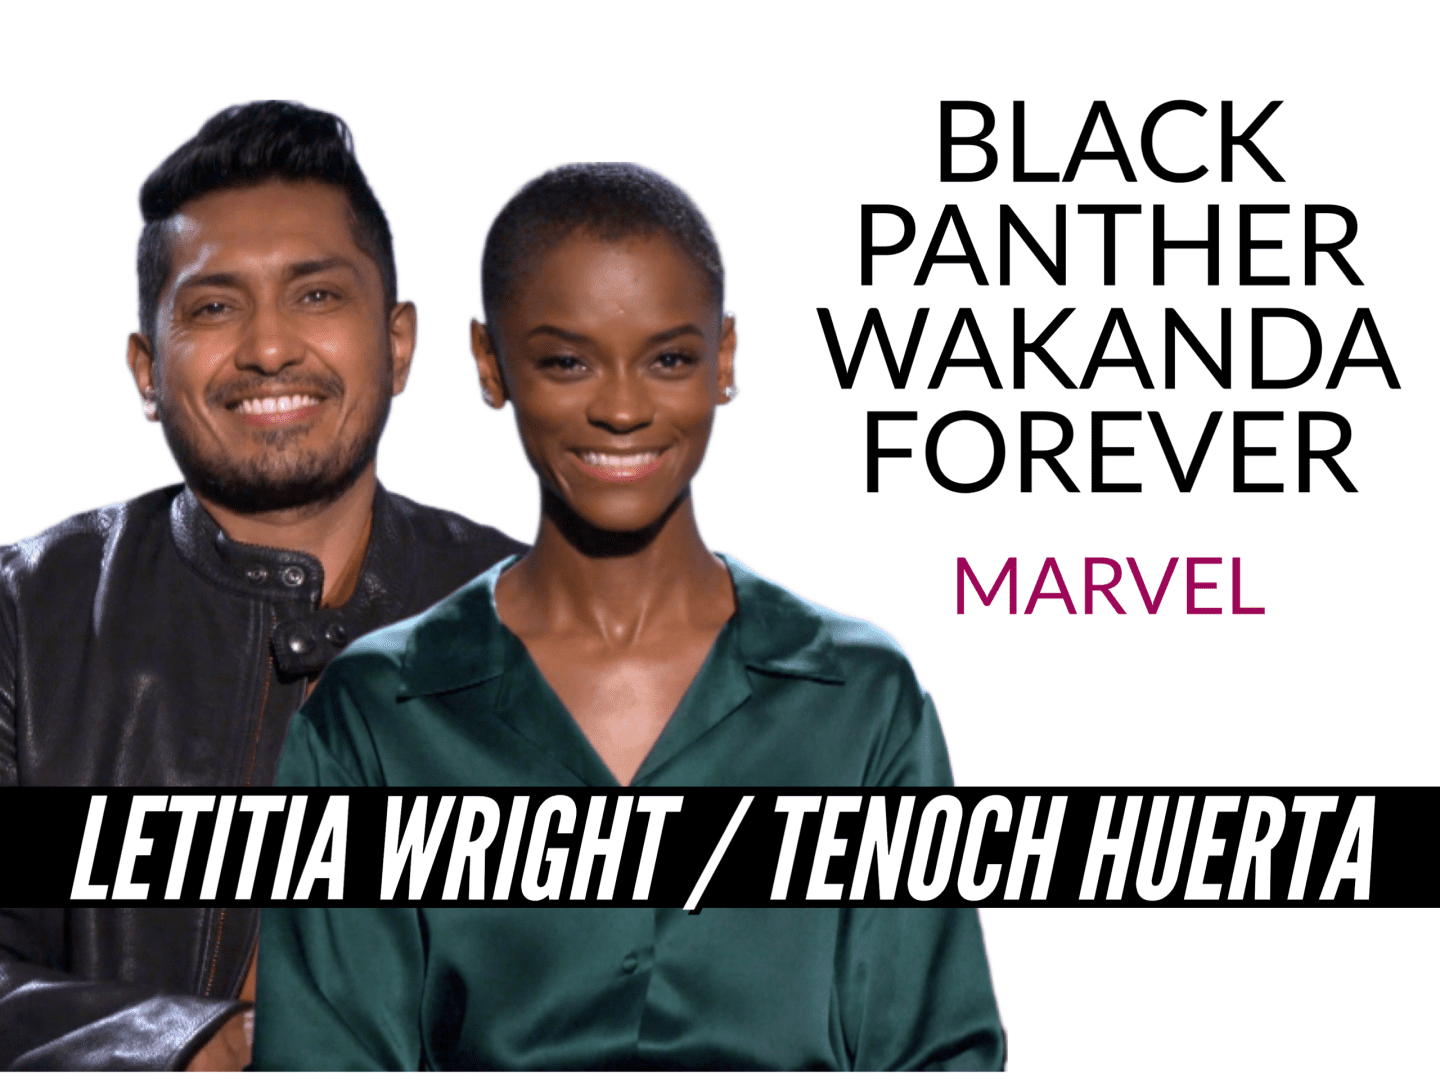 Letitia Wright and Tenoch Huerta face off in 'Black Panther: Wakanda Forever'